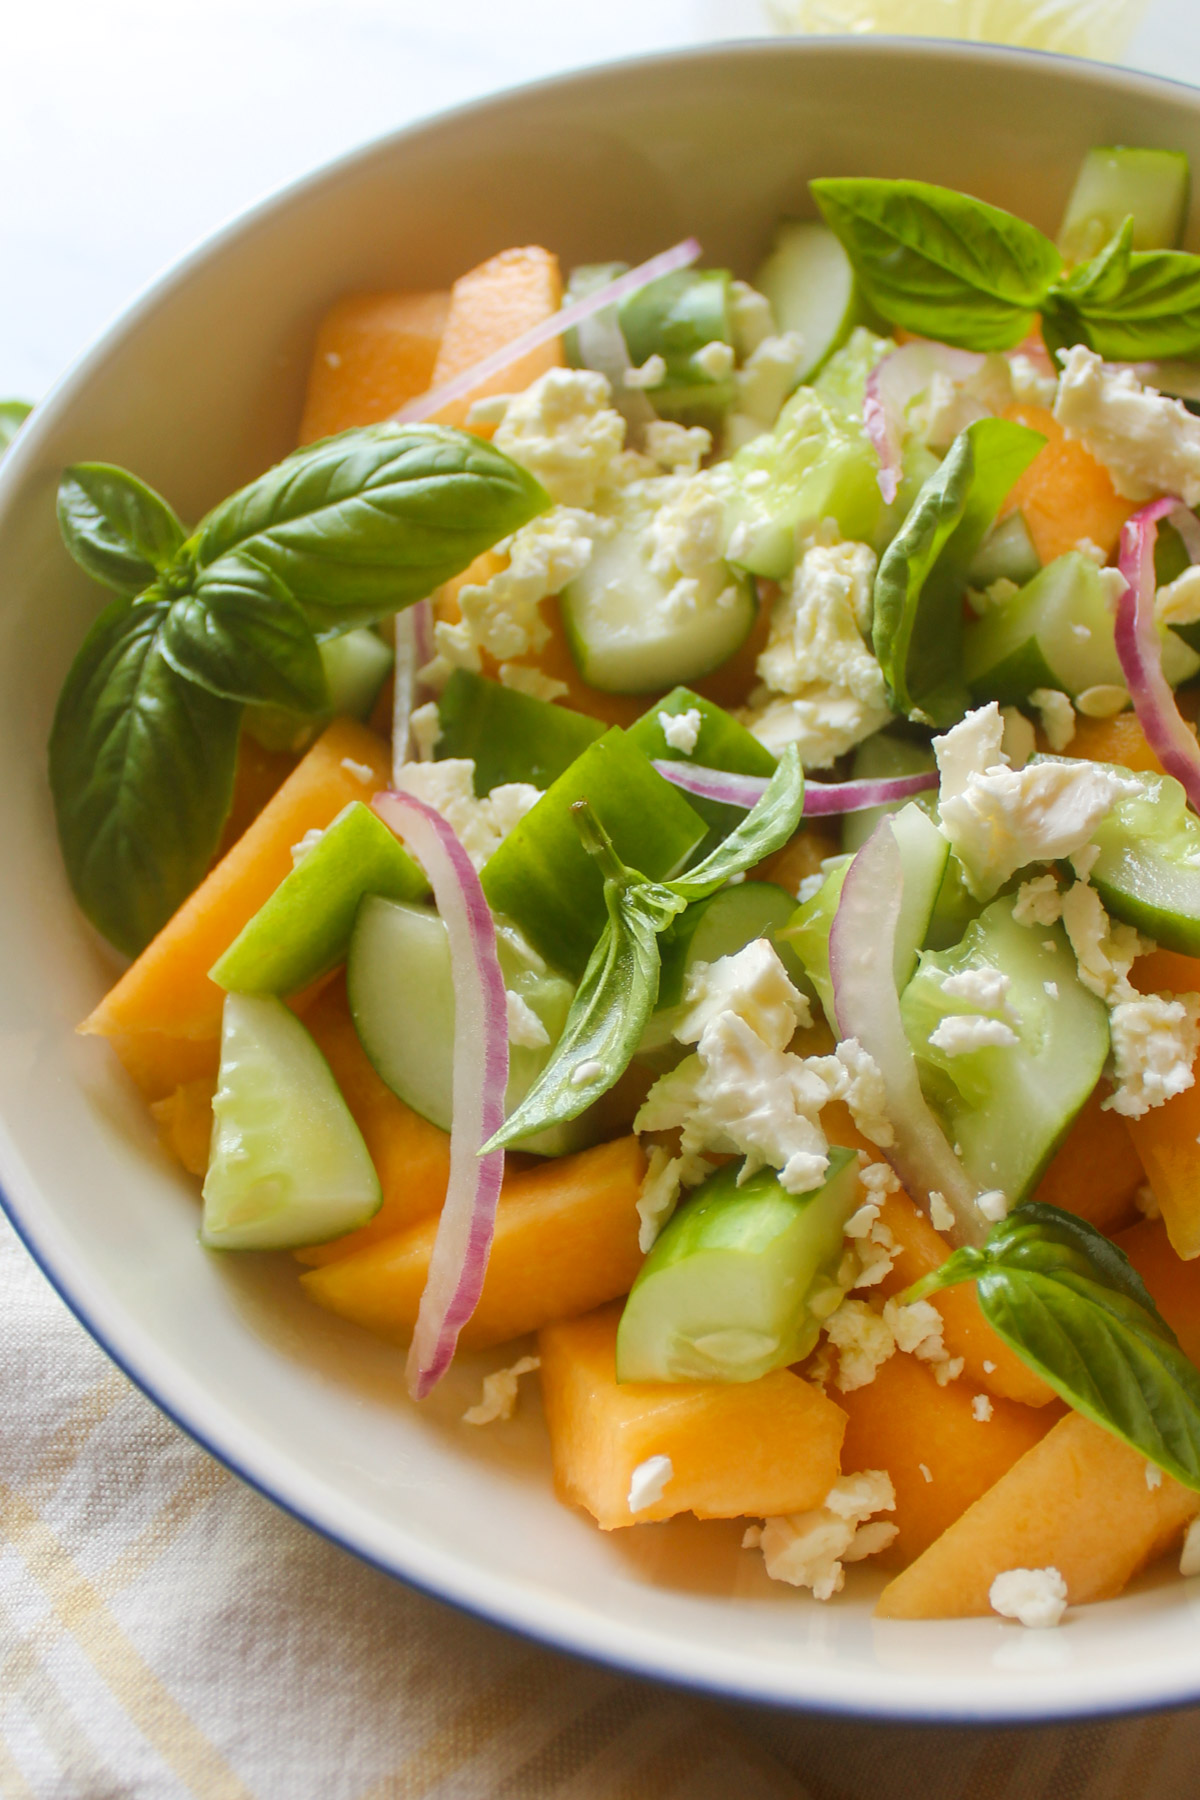 A close up of the bowl of Cucumber Cantaloupe Salad with fresh basil leaves.